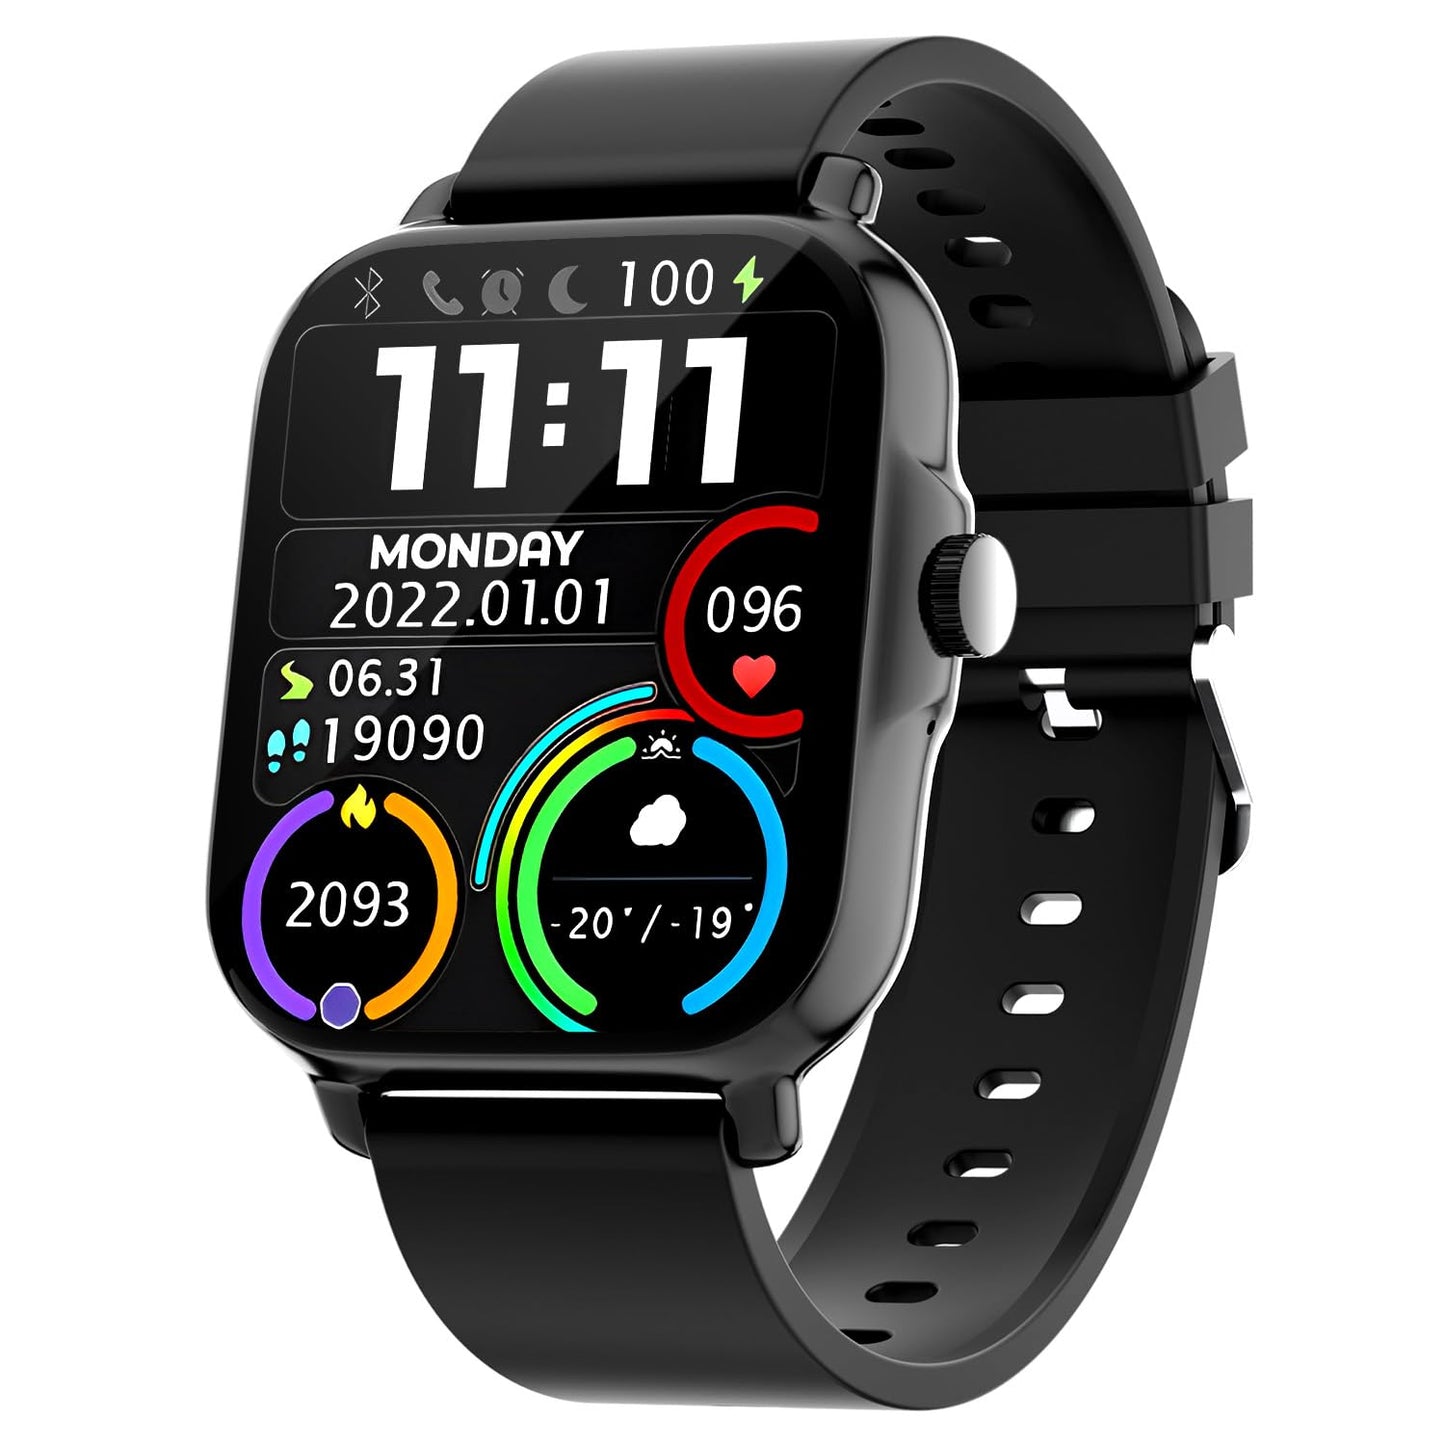 Kratos SW14 Smart Watch for Men and Women with Bluetooth Calling, 1.85" HD Display, IP67 Water Resistant, Long Battery Life, 25+ Sport Modes,SpO2 & Health Monitoring, Smart Watch with 200+ Watch Face